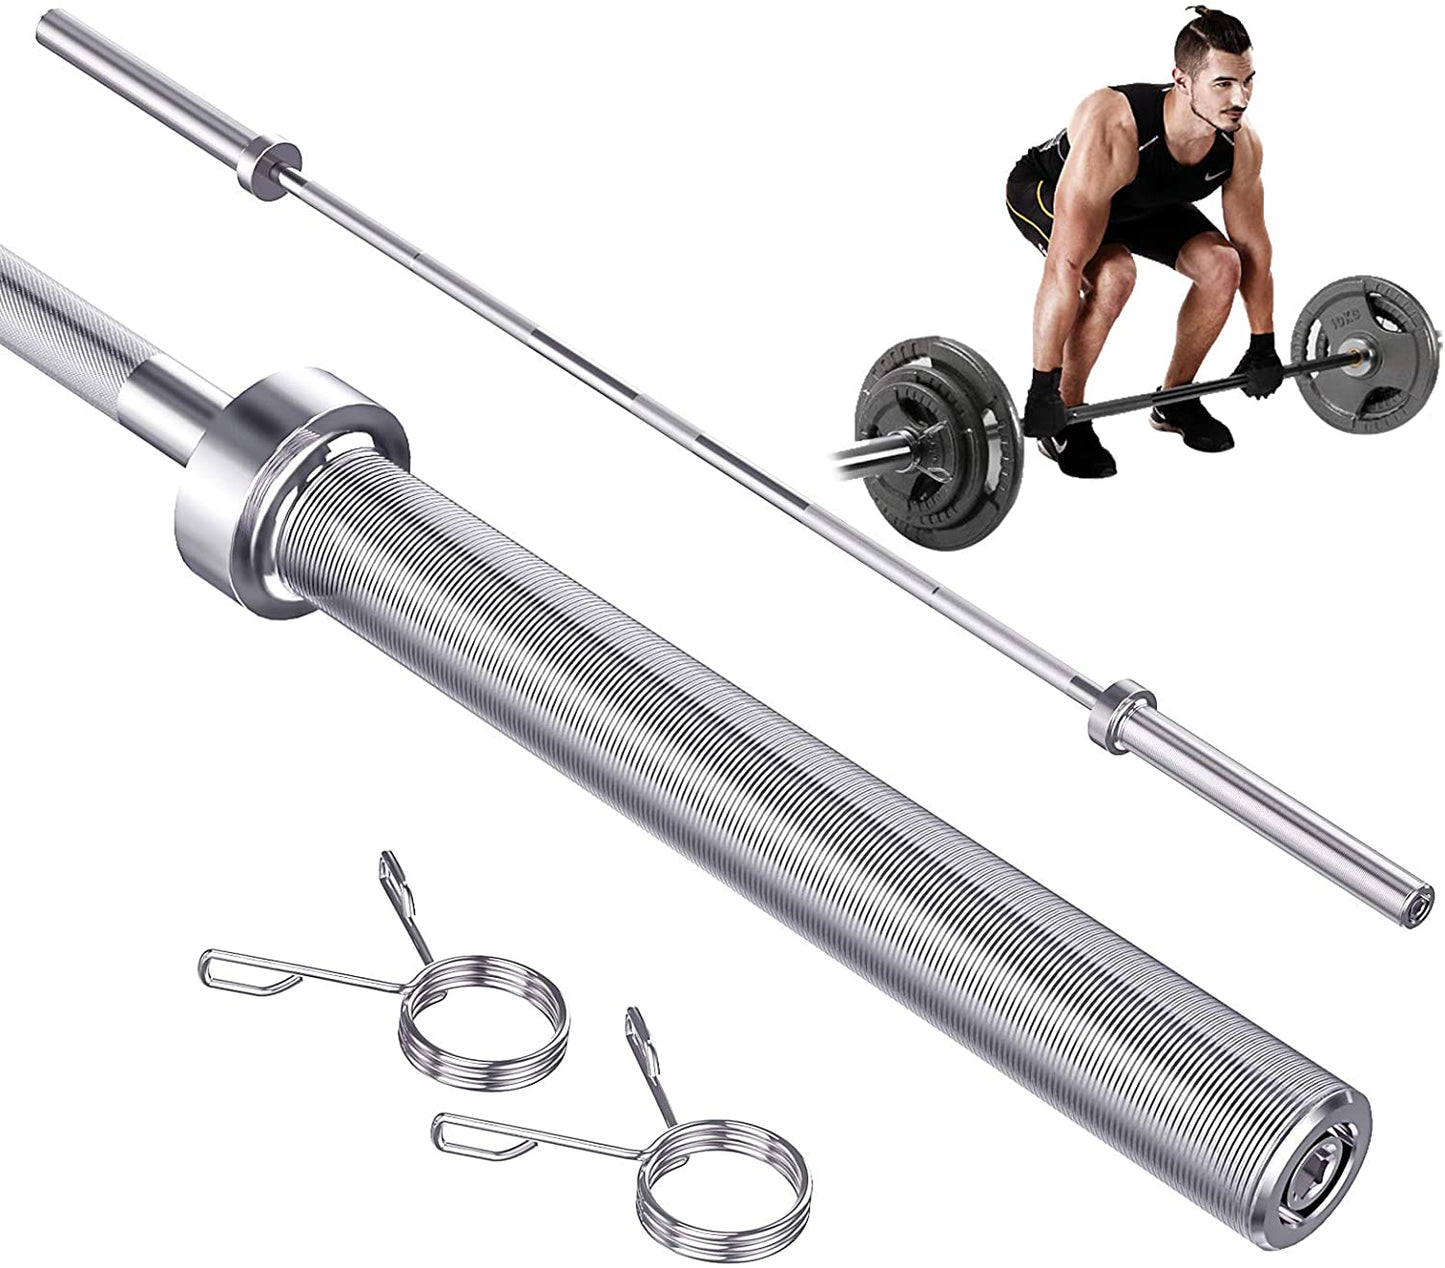 Yoleo 7ft Olympic Barbell bar Weight Lifting with Spinlock Collars for Home Gym